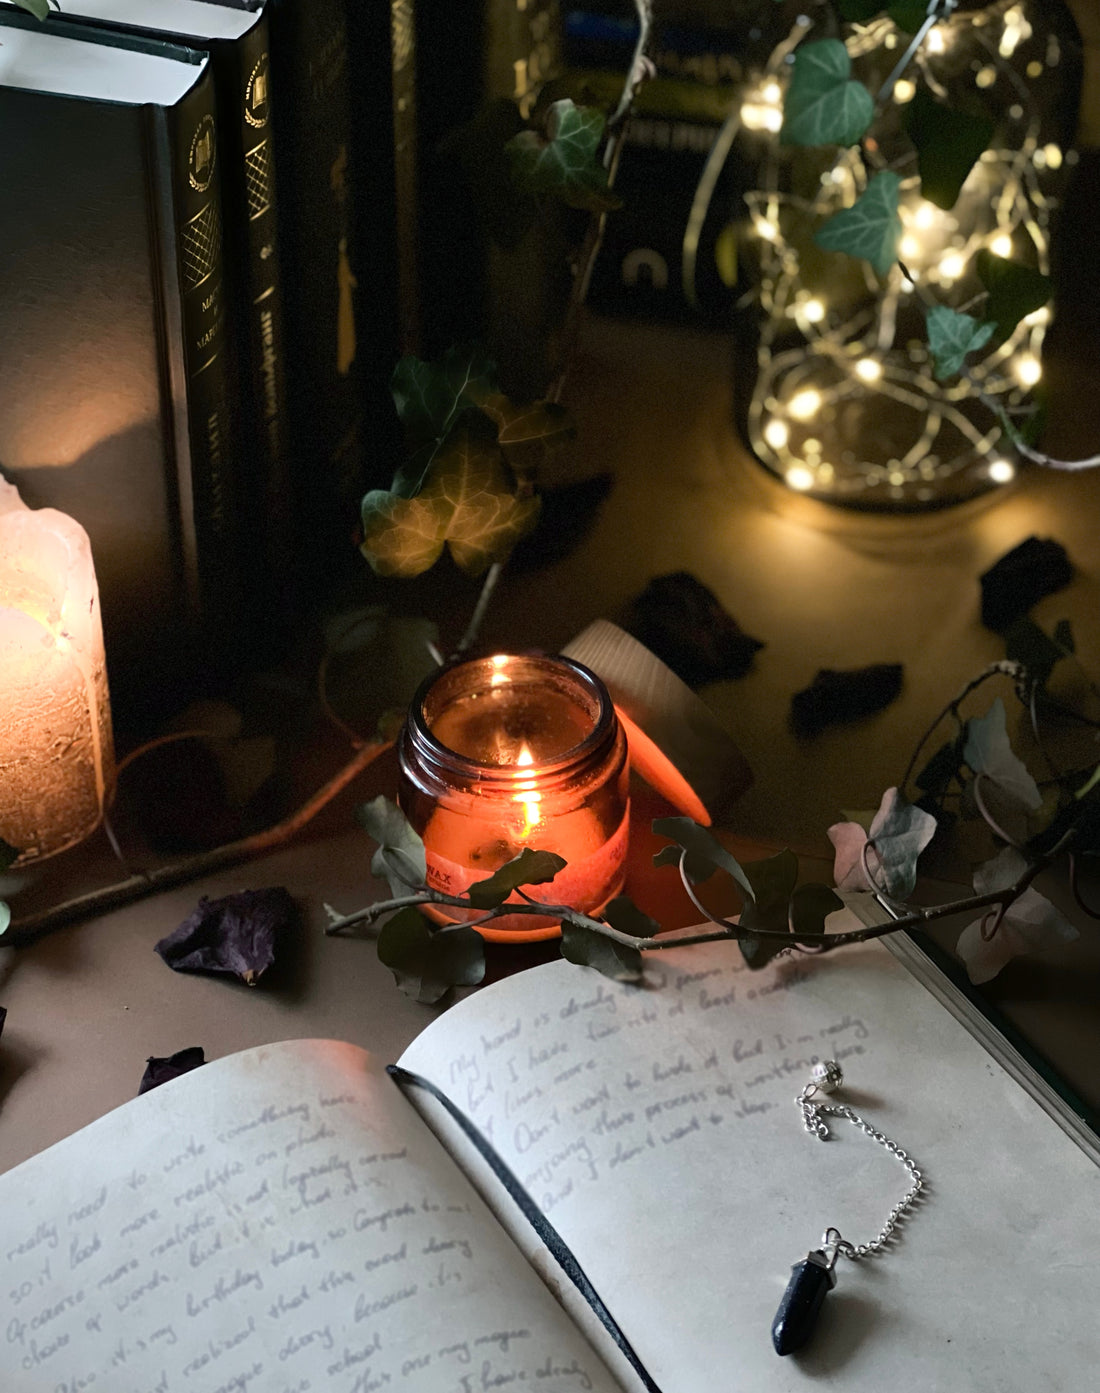 Candlelit Reading - A Cozy Oasis of Self-Care